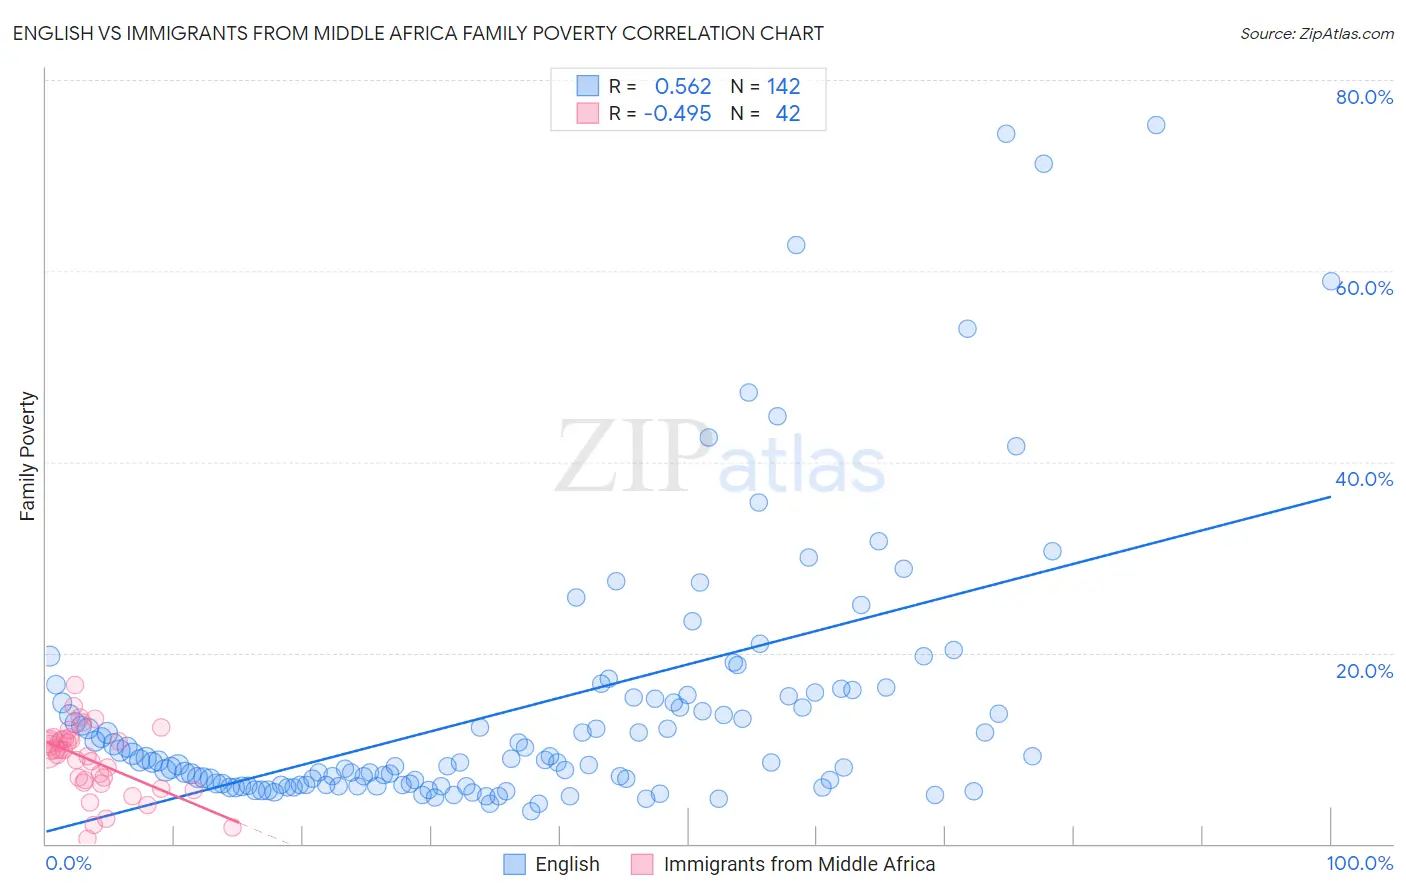 English vs Immigrants from Middle Africa Family Poverty